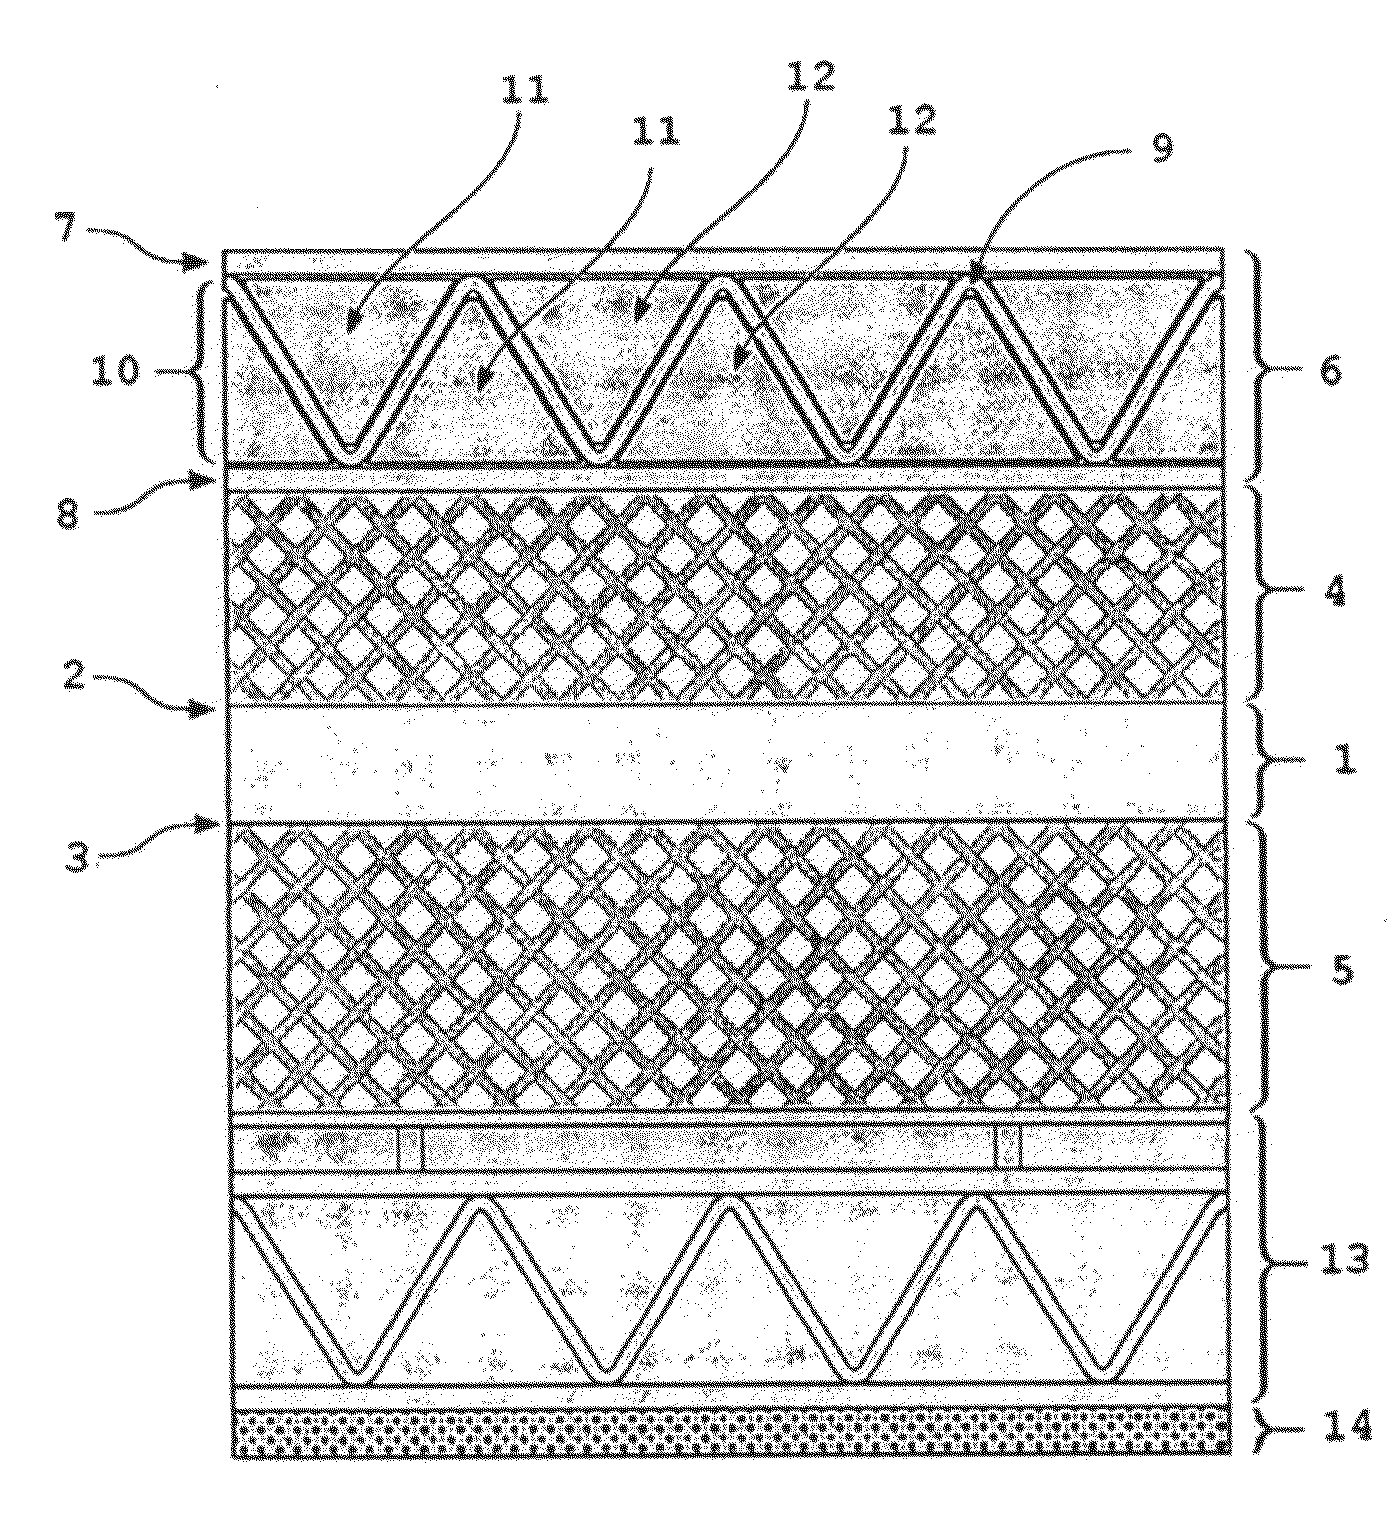 Synergistically-Layered Armor Systems and Methods for Producing Layers Thereof